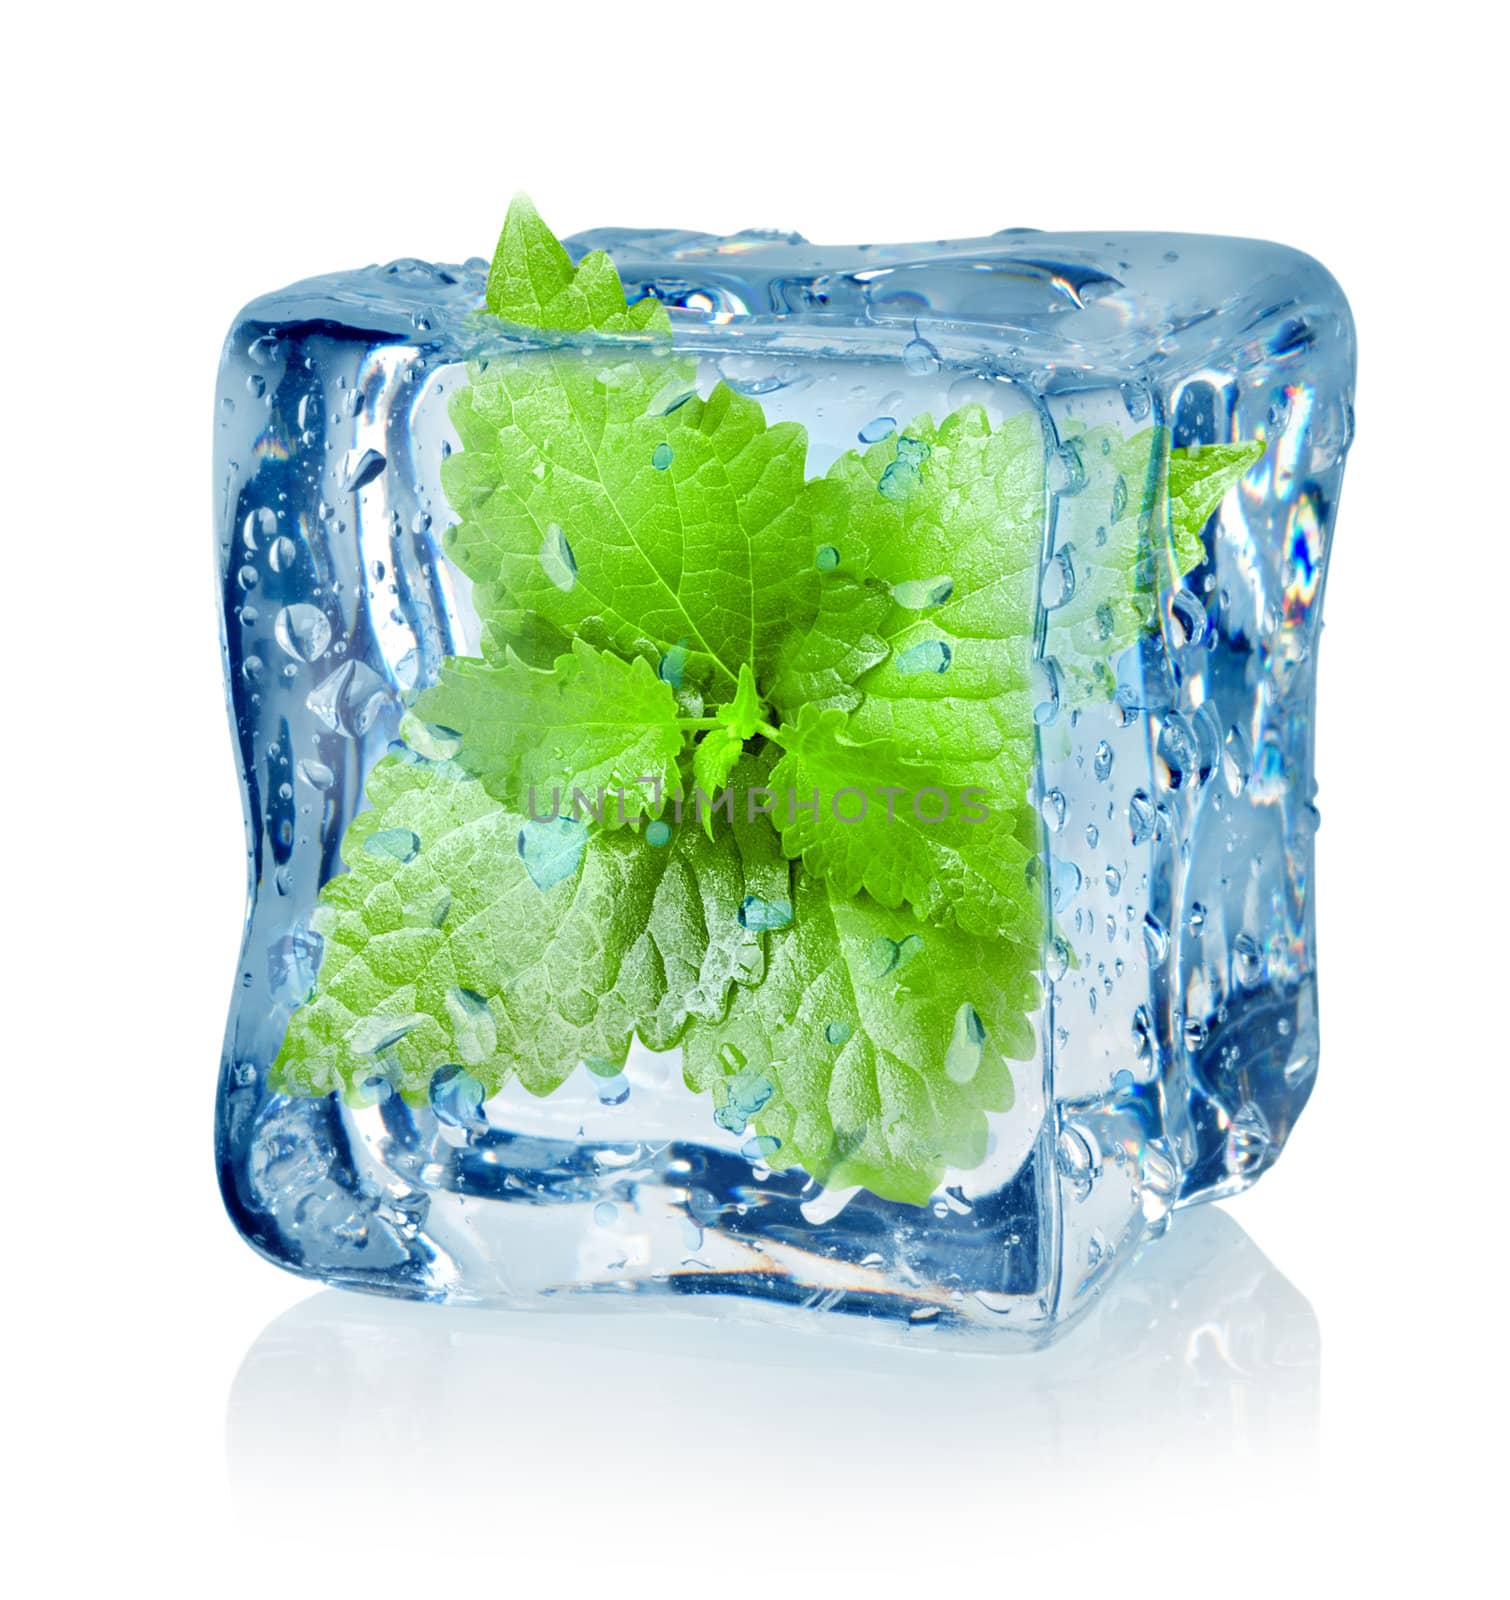 Ice cube and mint isolated on a white background